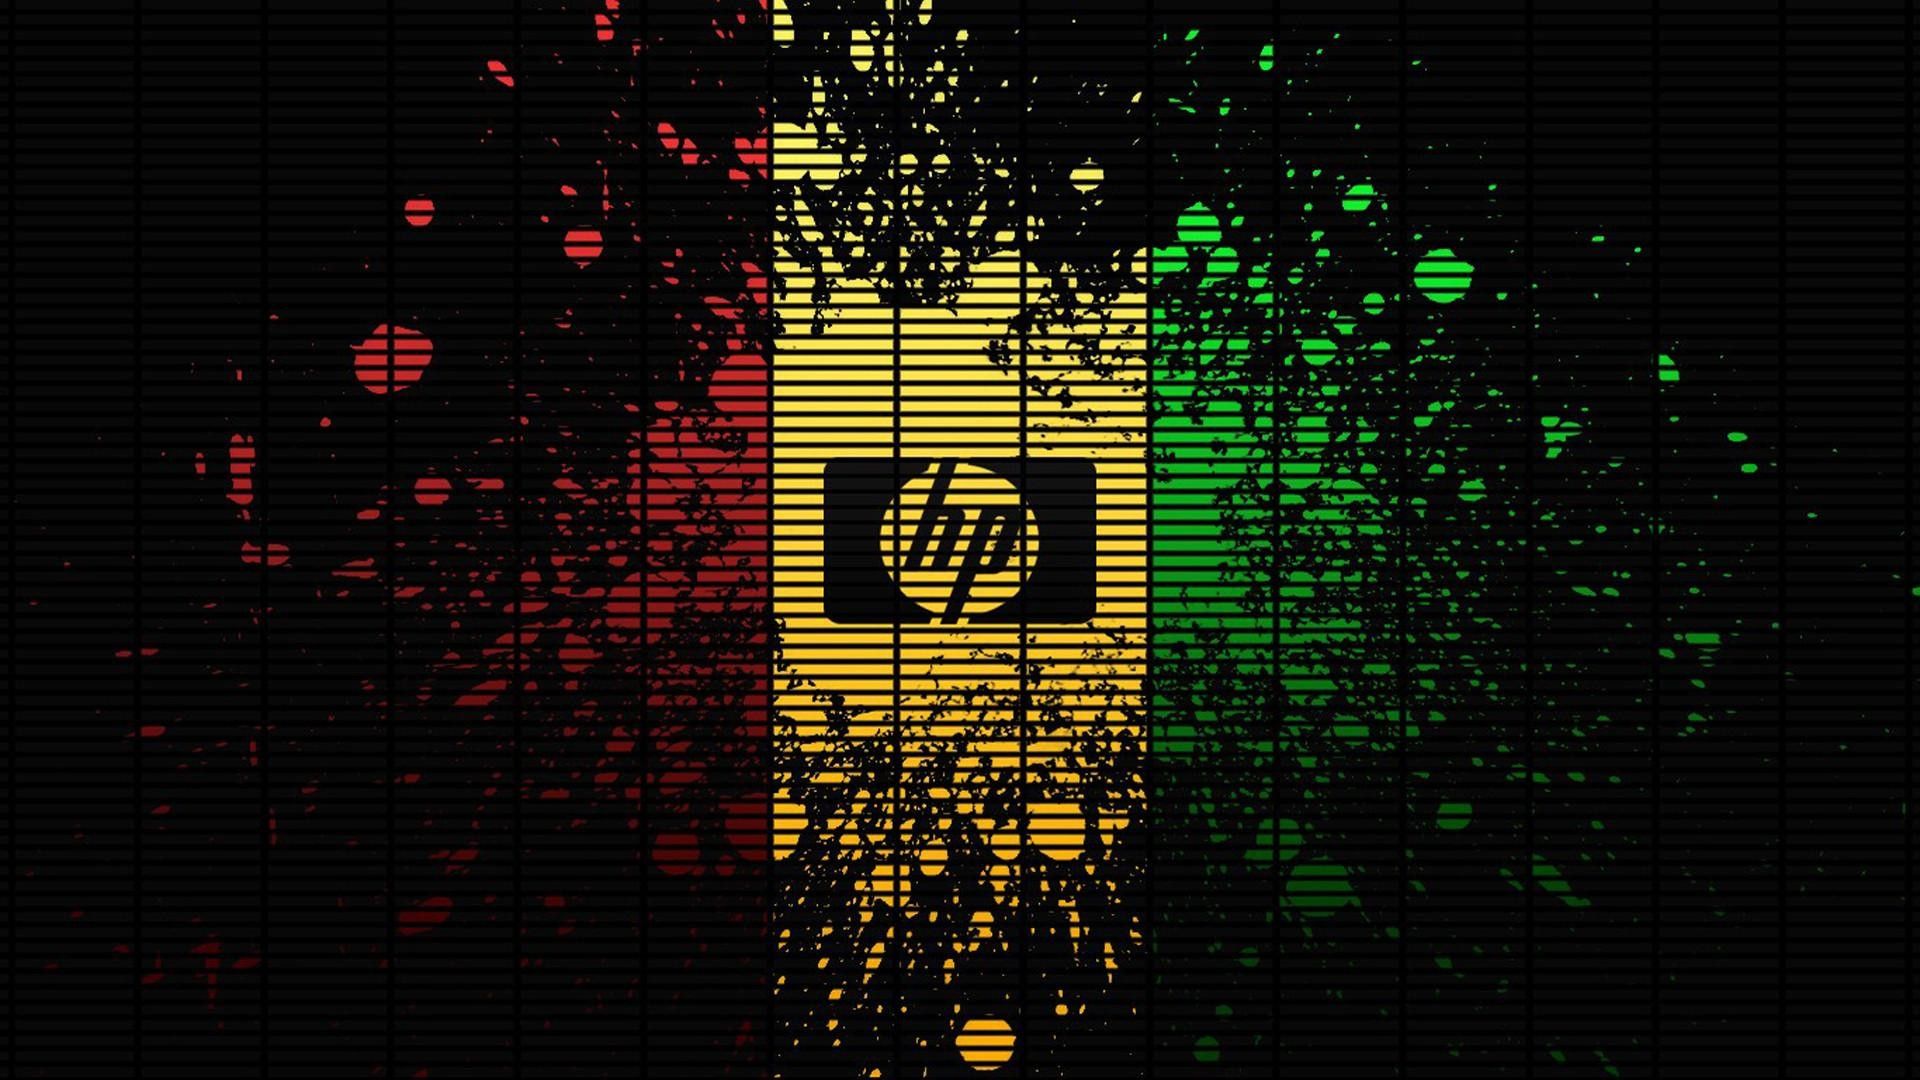 Awesome Hp Wallpapers On Wallpaperdog